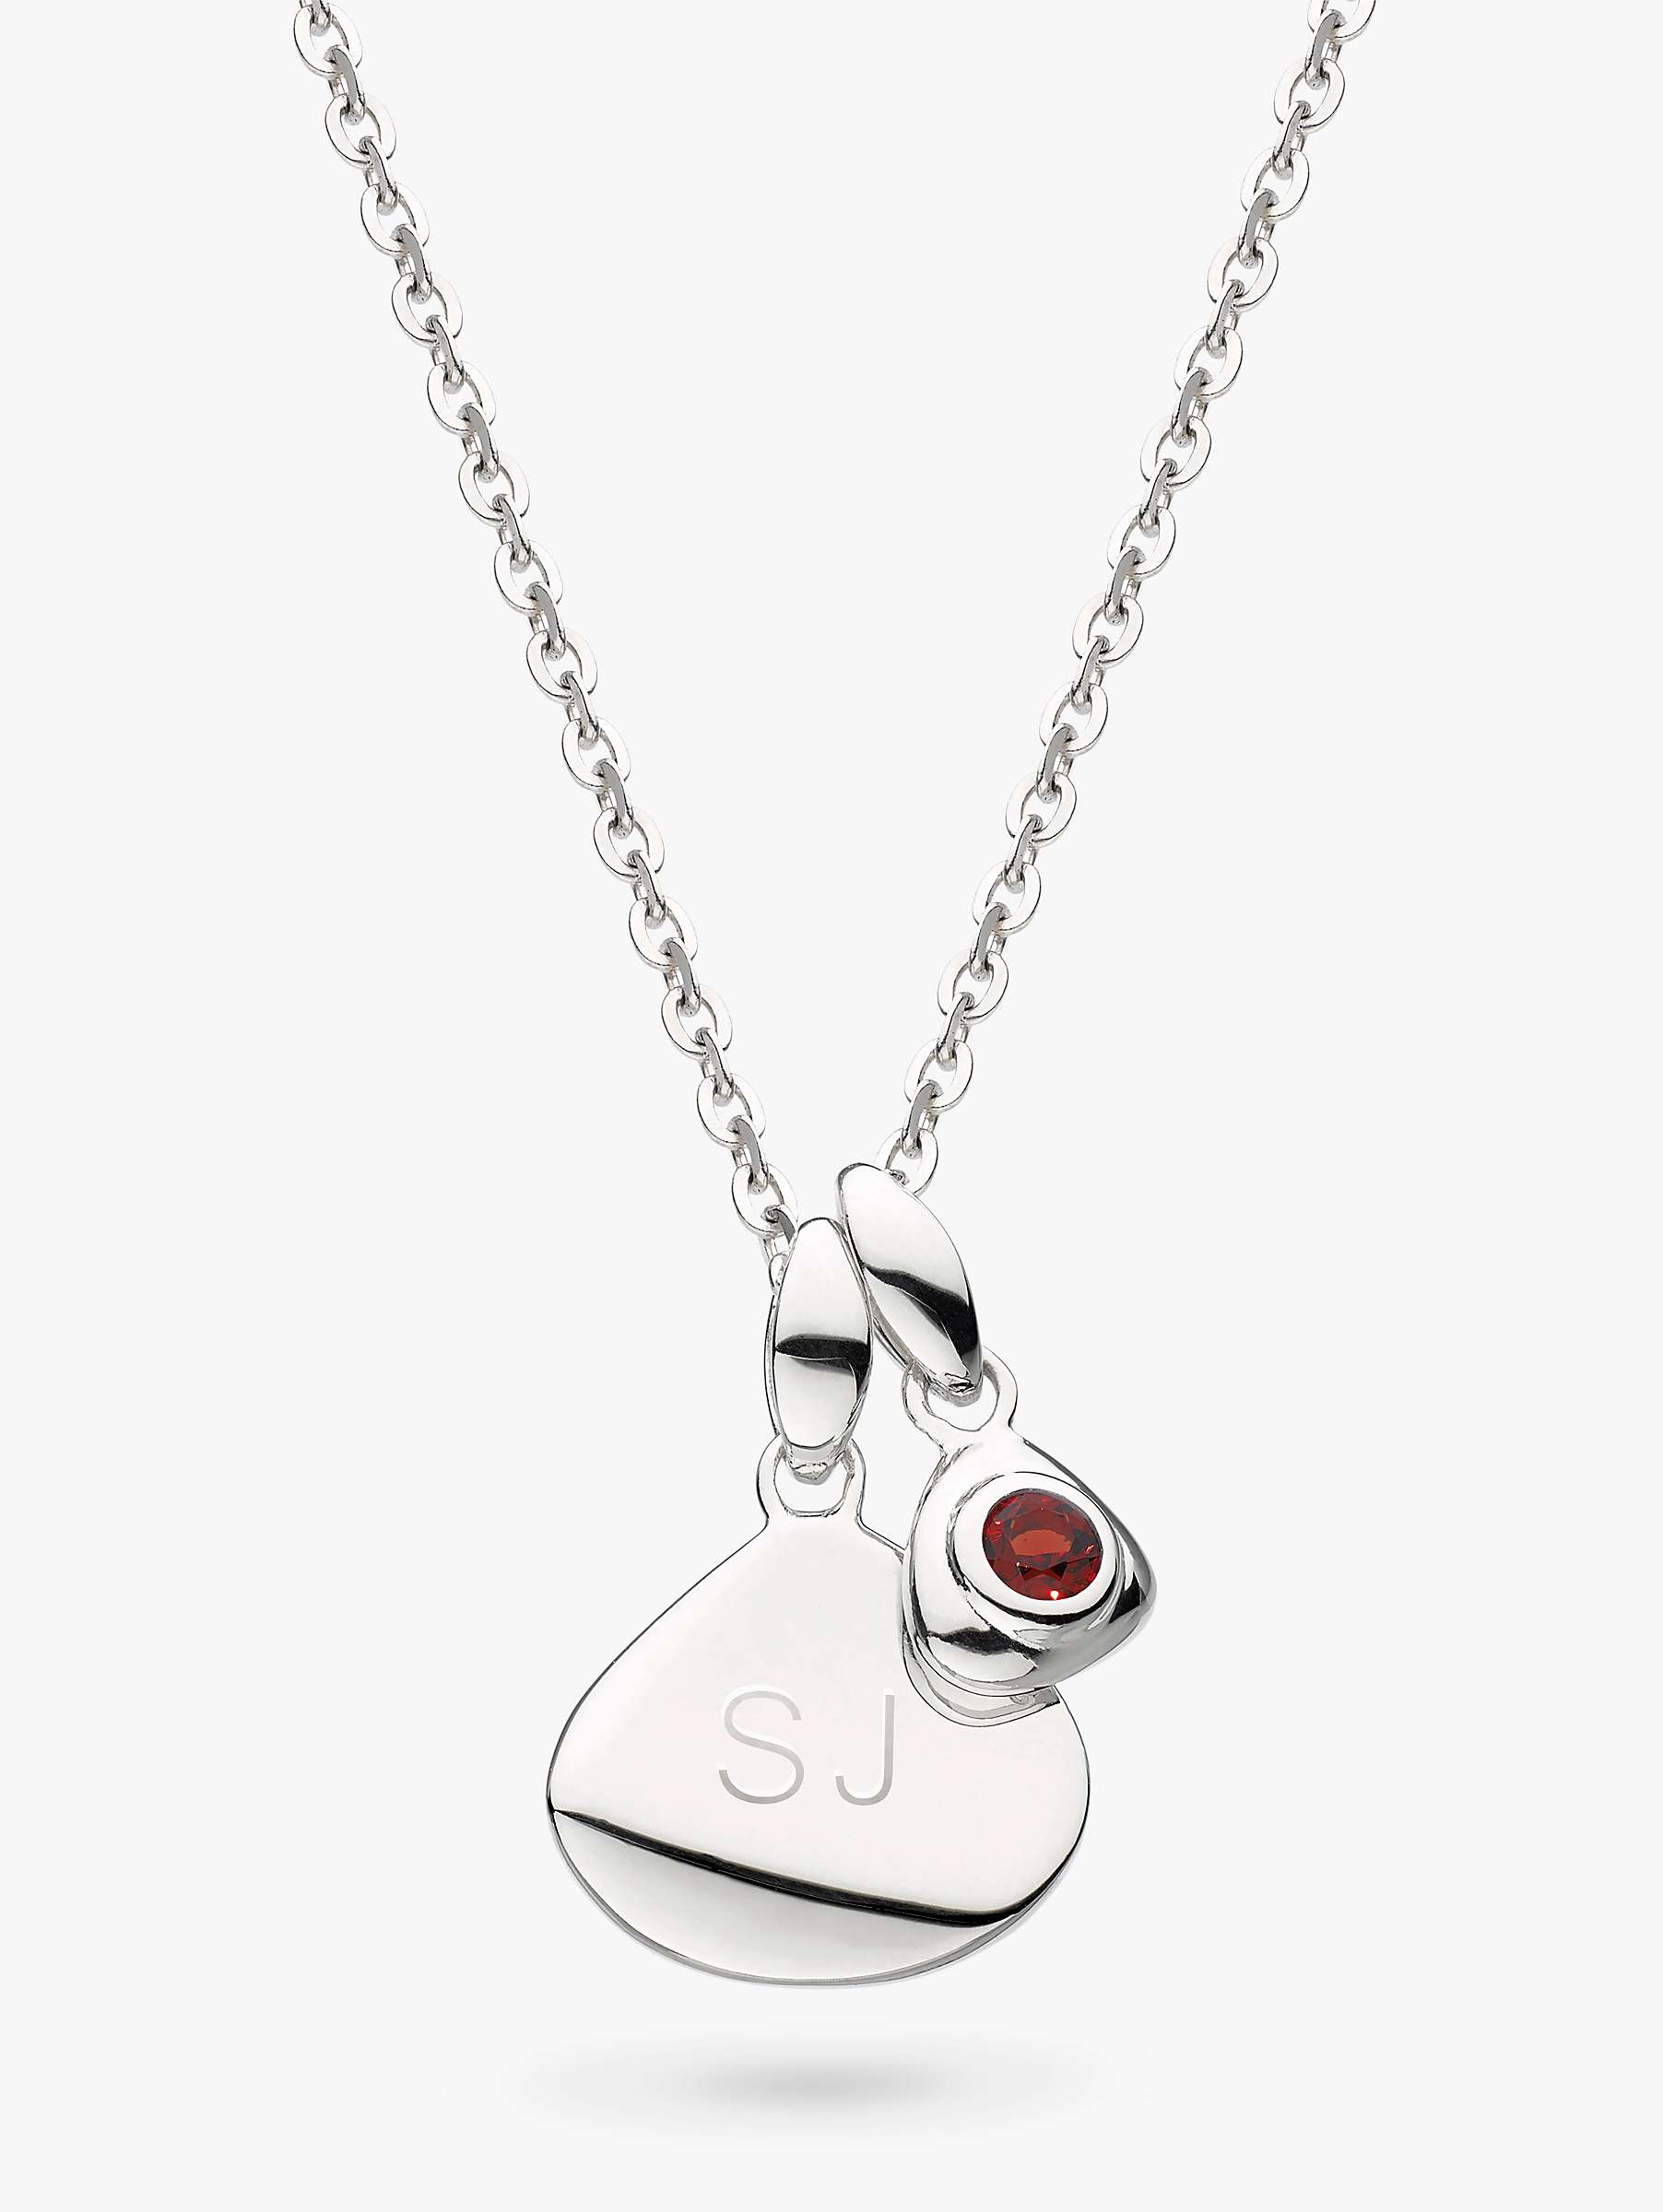 Buy Kit Heath Personalised Sterling Silver Pebble and Tag Birthstone Pendant Necklace Online at johnlewis.com